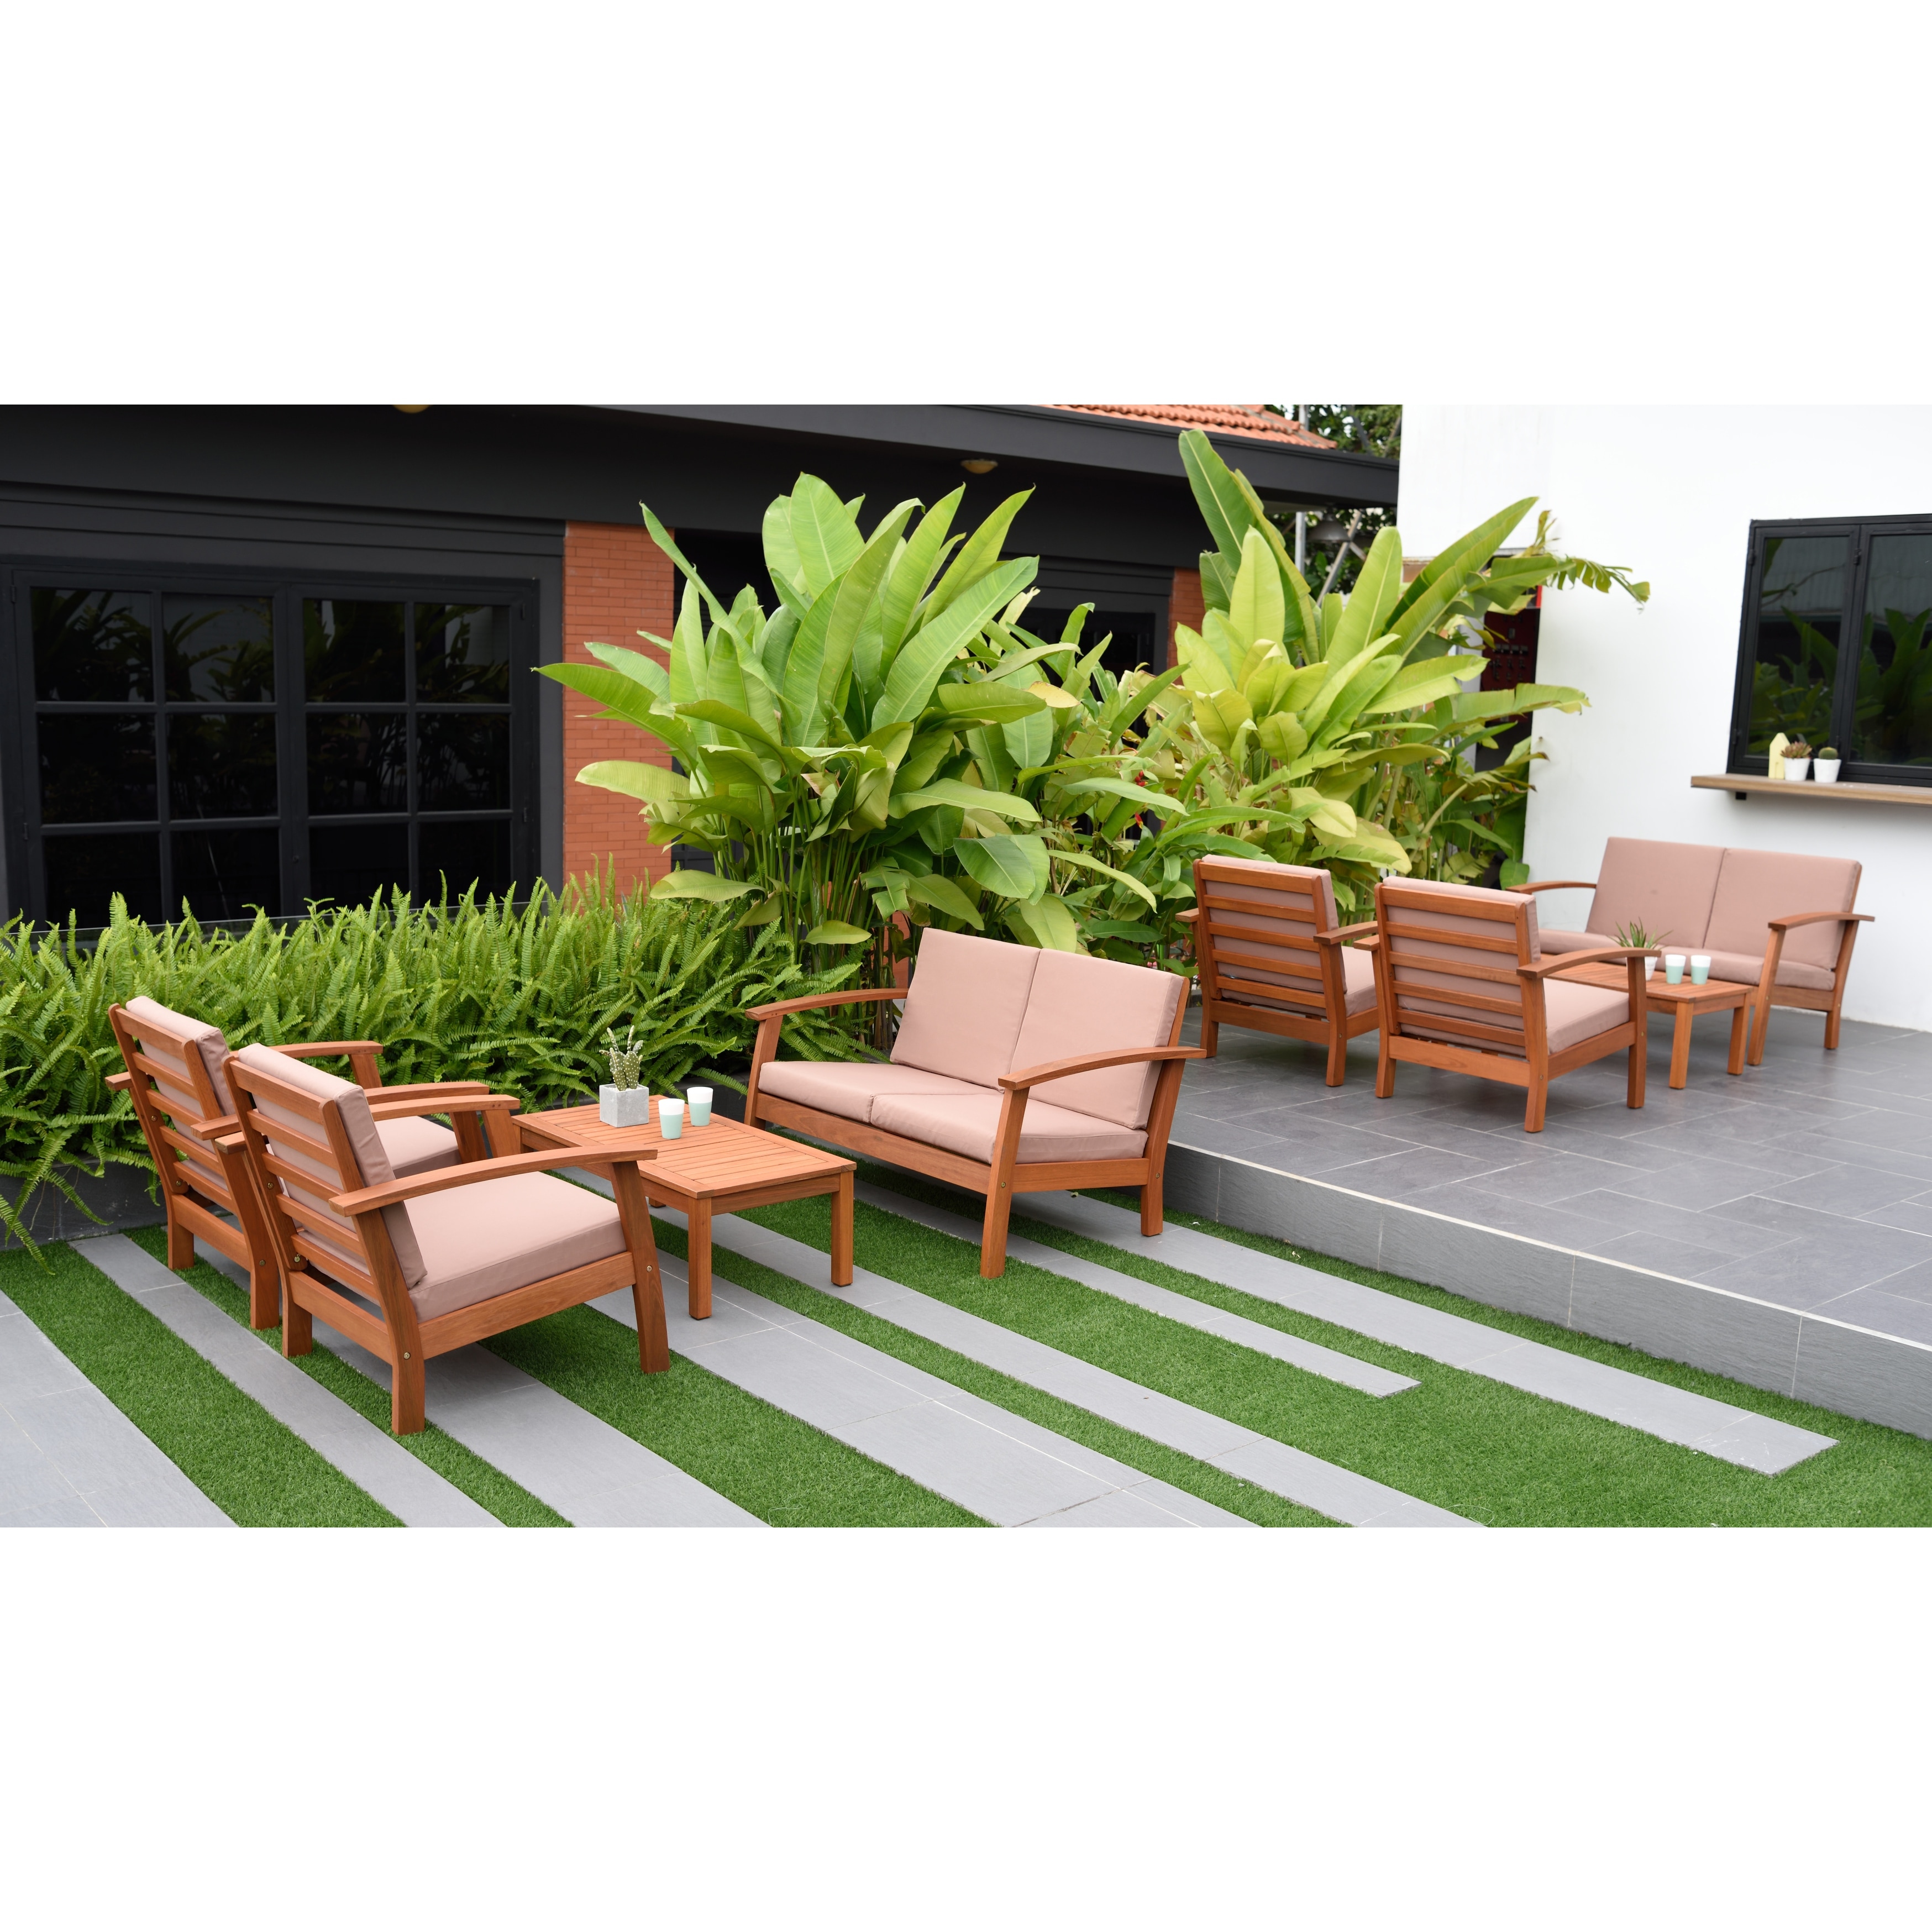 Amazonia Fsc Certified Wood 8pc Outdoor Patio Seating Set